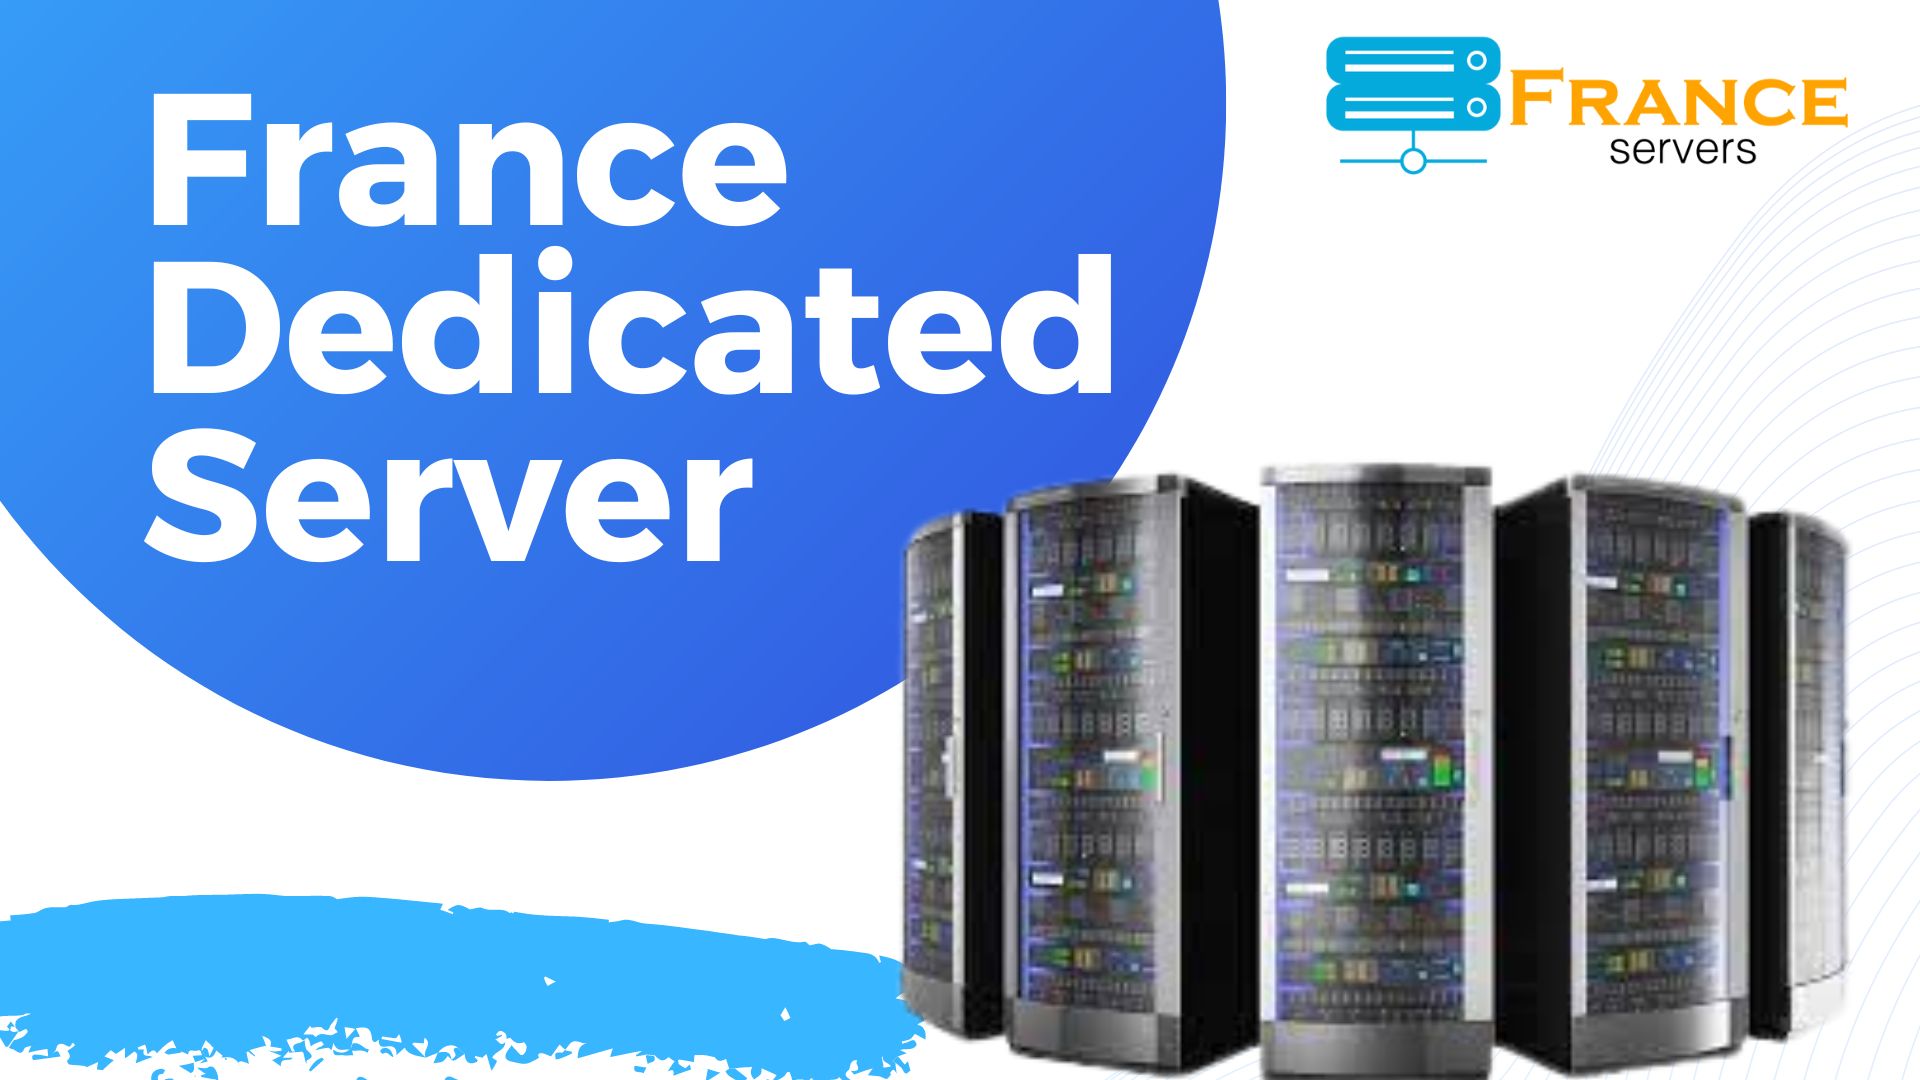 France Dedicated Server is the Best Solution for Your Business